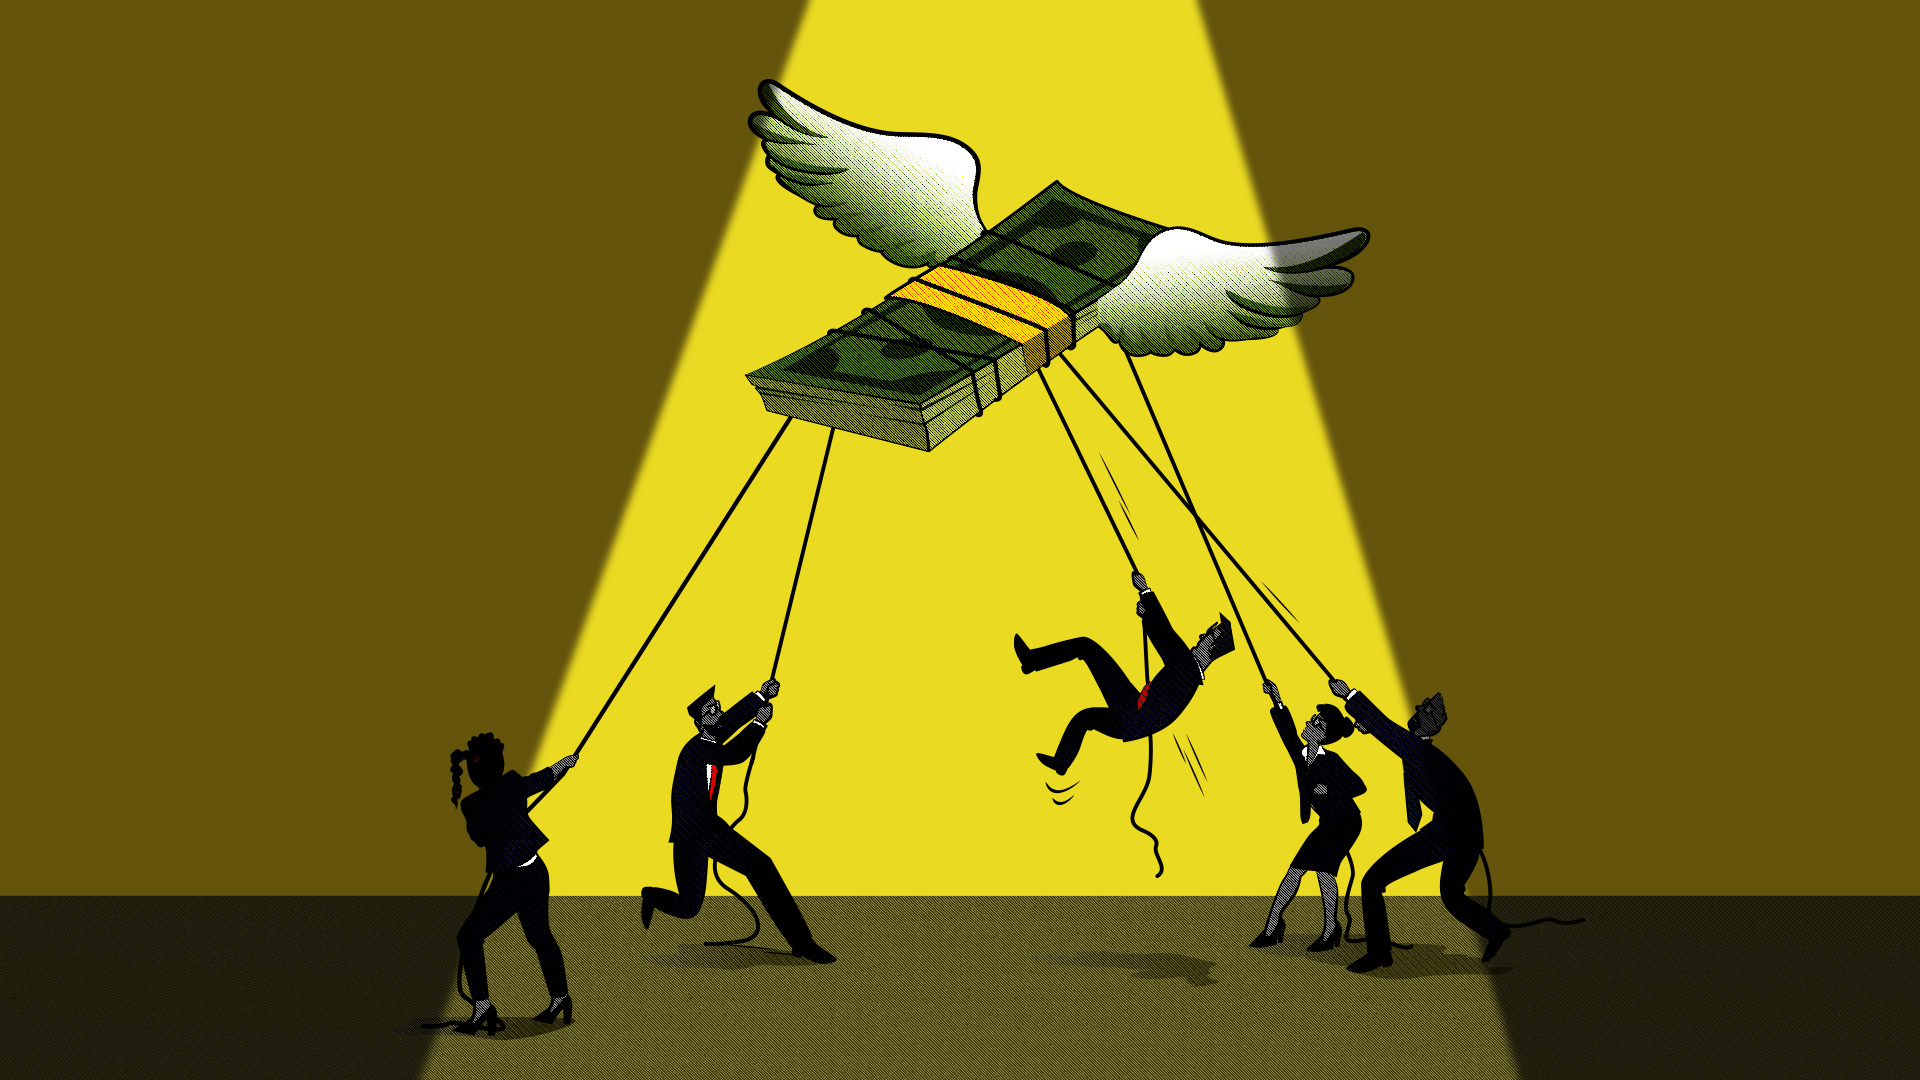 An illustration of a stack of money with wings, as several silhouetted people try to keep it from flying away, using ropes attached to it.